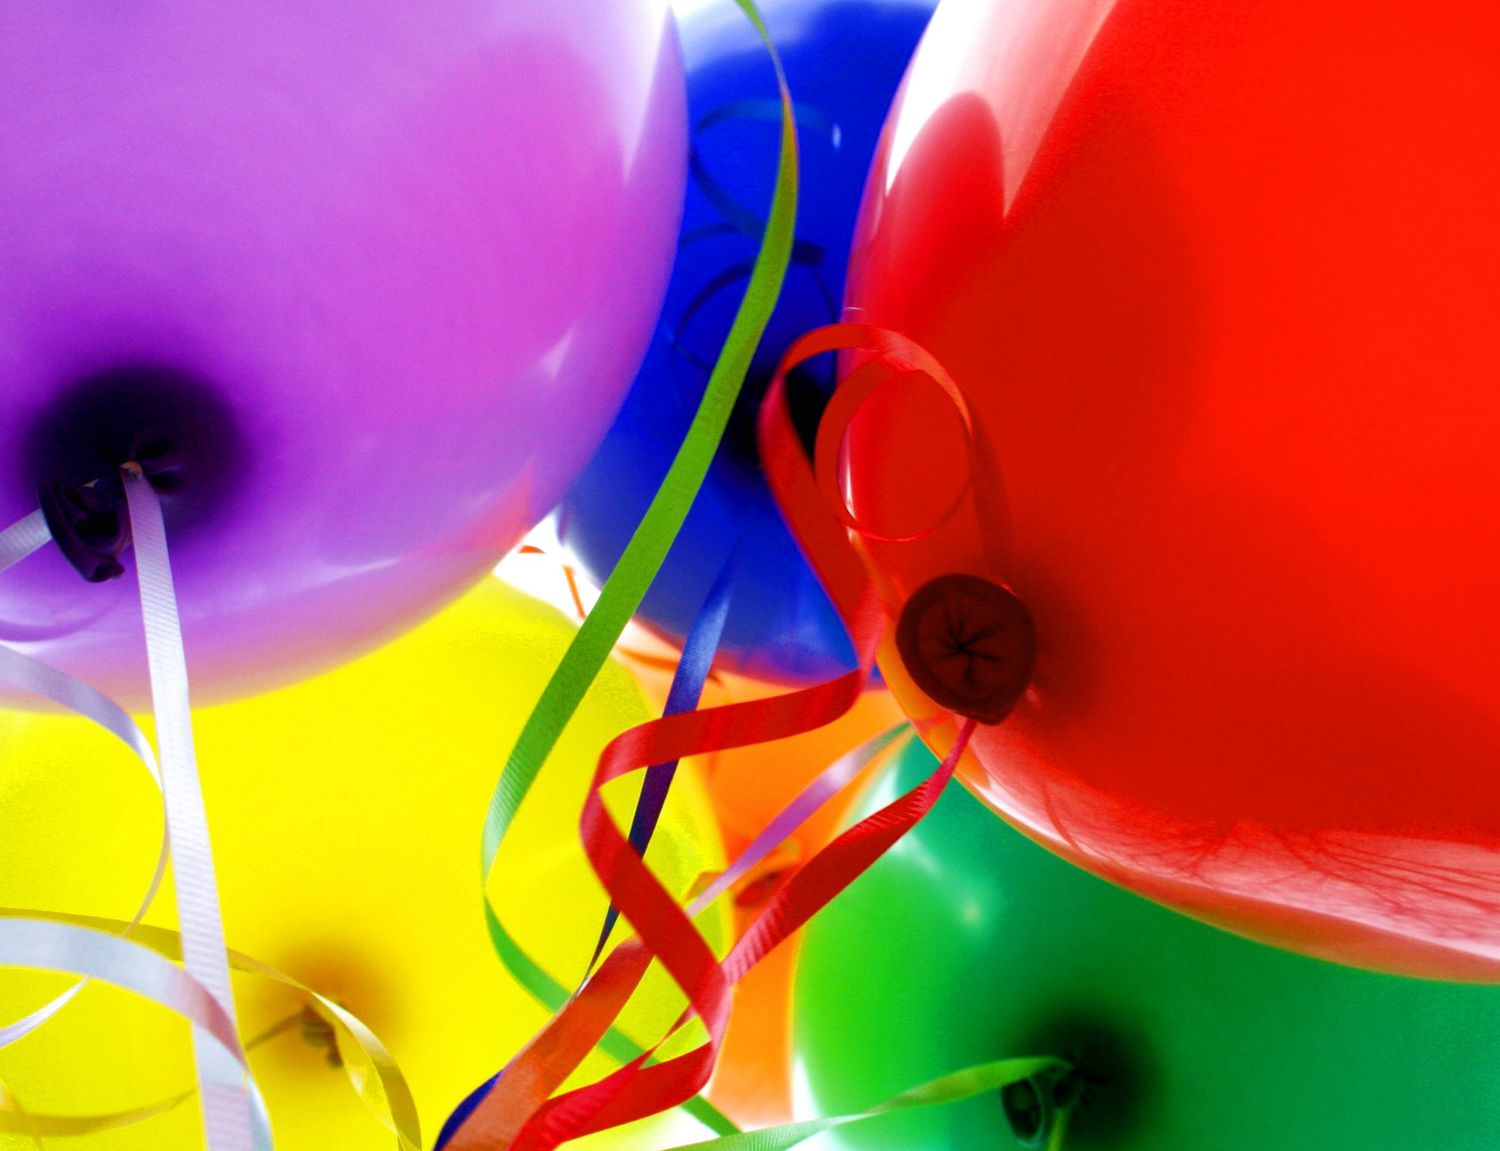 An image of birthday balloons.